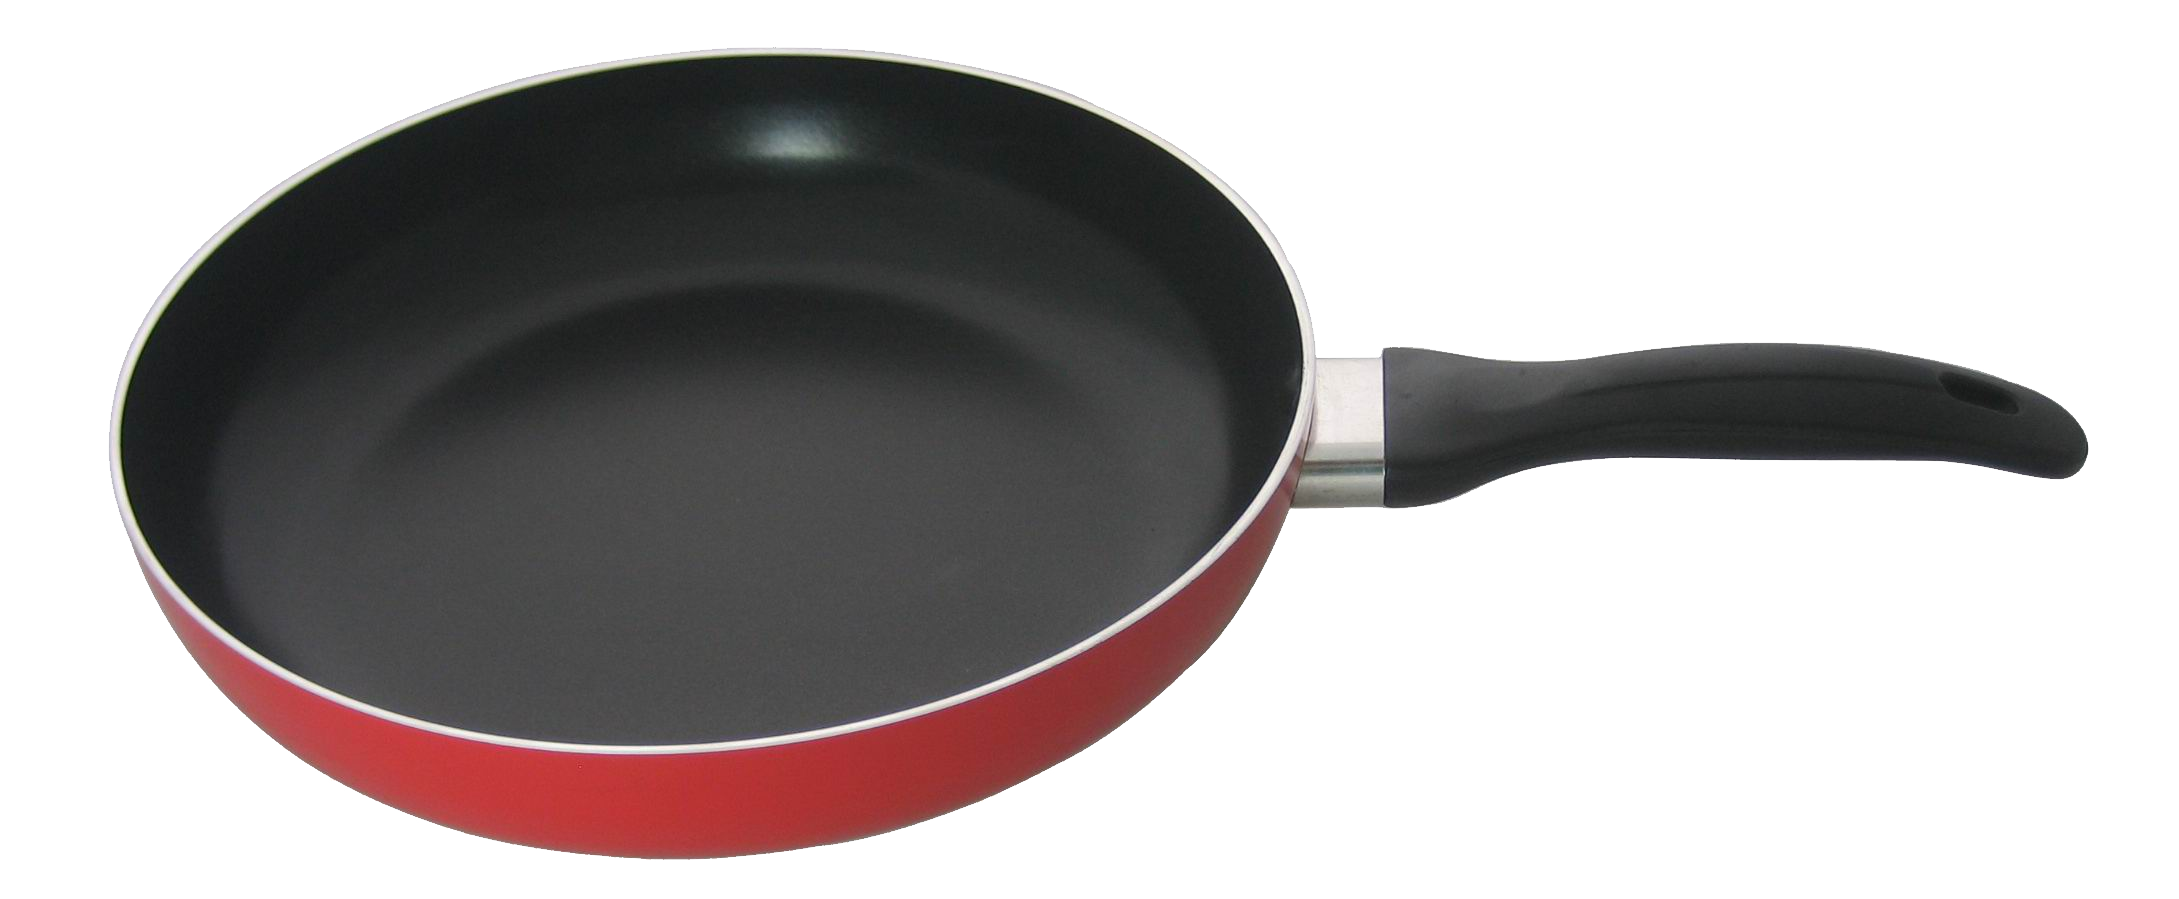 Frying Red Pan PNG HQ Image pngteam.com